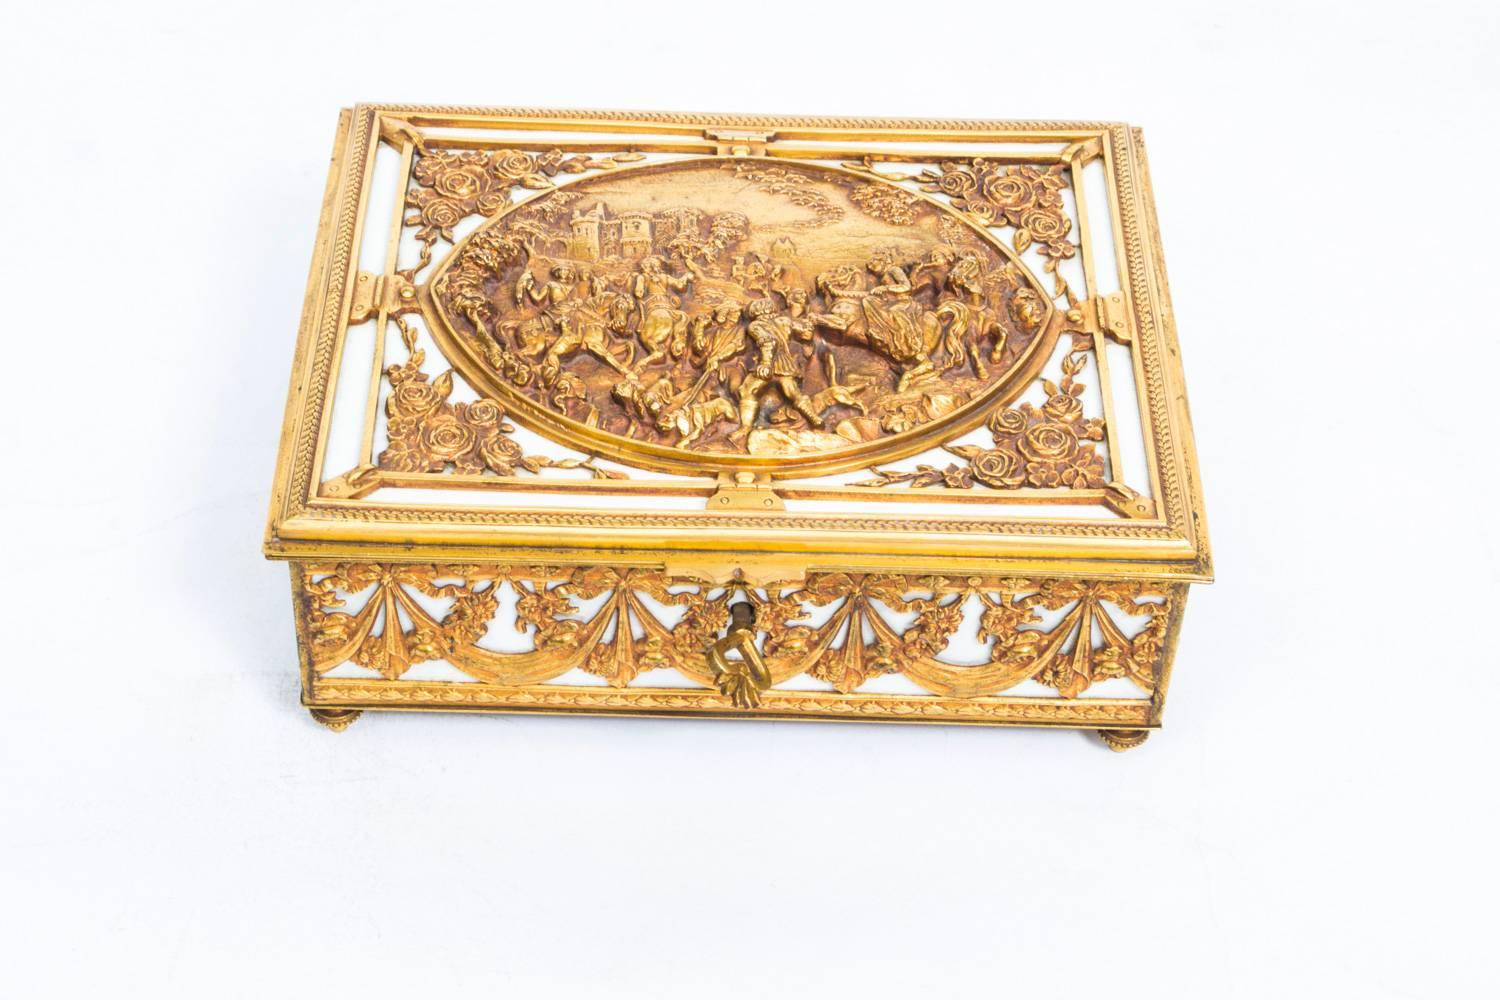 This is a beautiful ivory and ormolu mounted casket, the hinged lid with oval three dimensional panel cast with hunting scene, hounds and figures on horseback, castle beyond, floral spandrels within plain borders and clasps.

The front, sides and